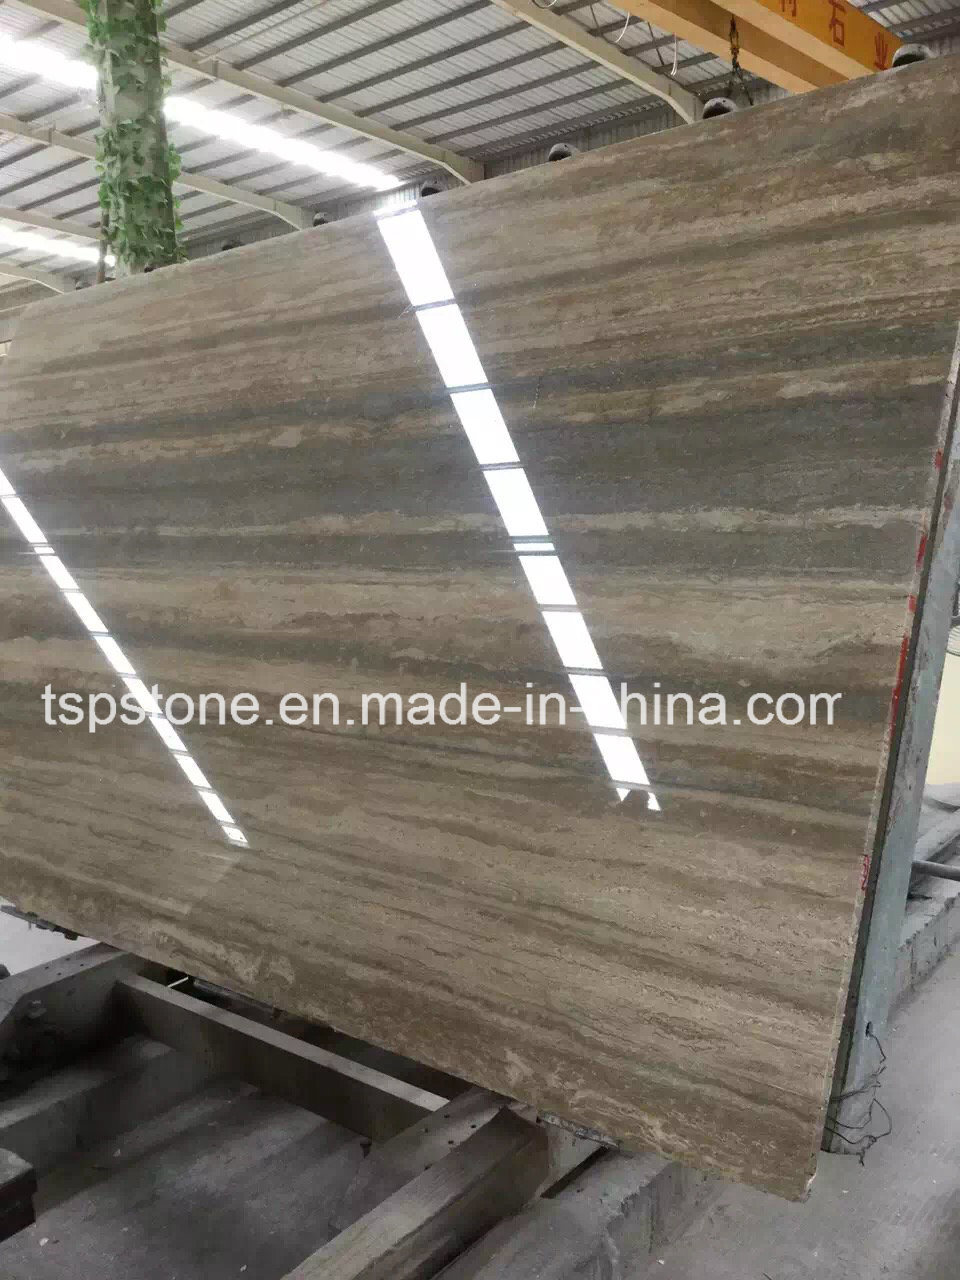 Italian Silver Travertine Marble Slabs for Project